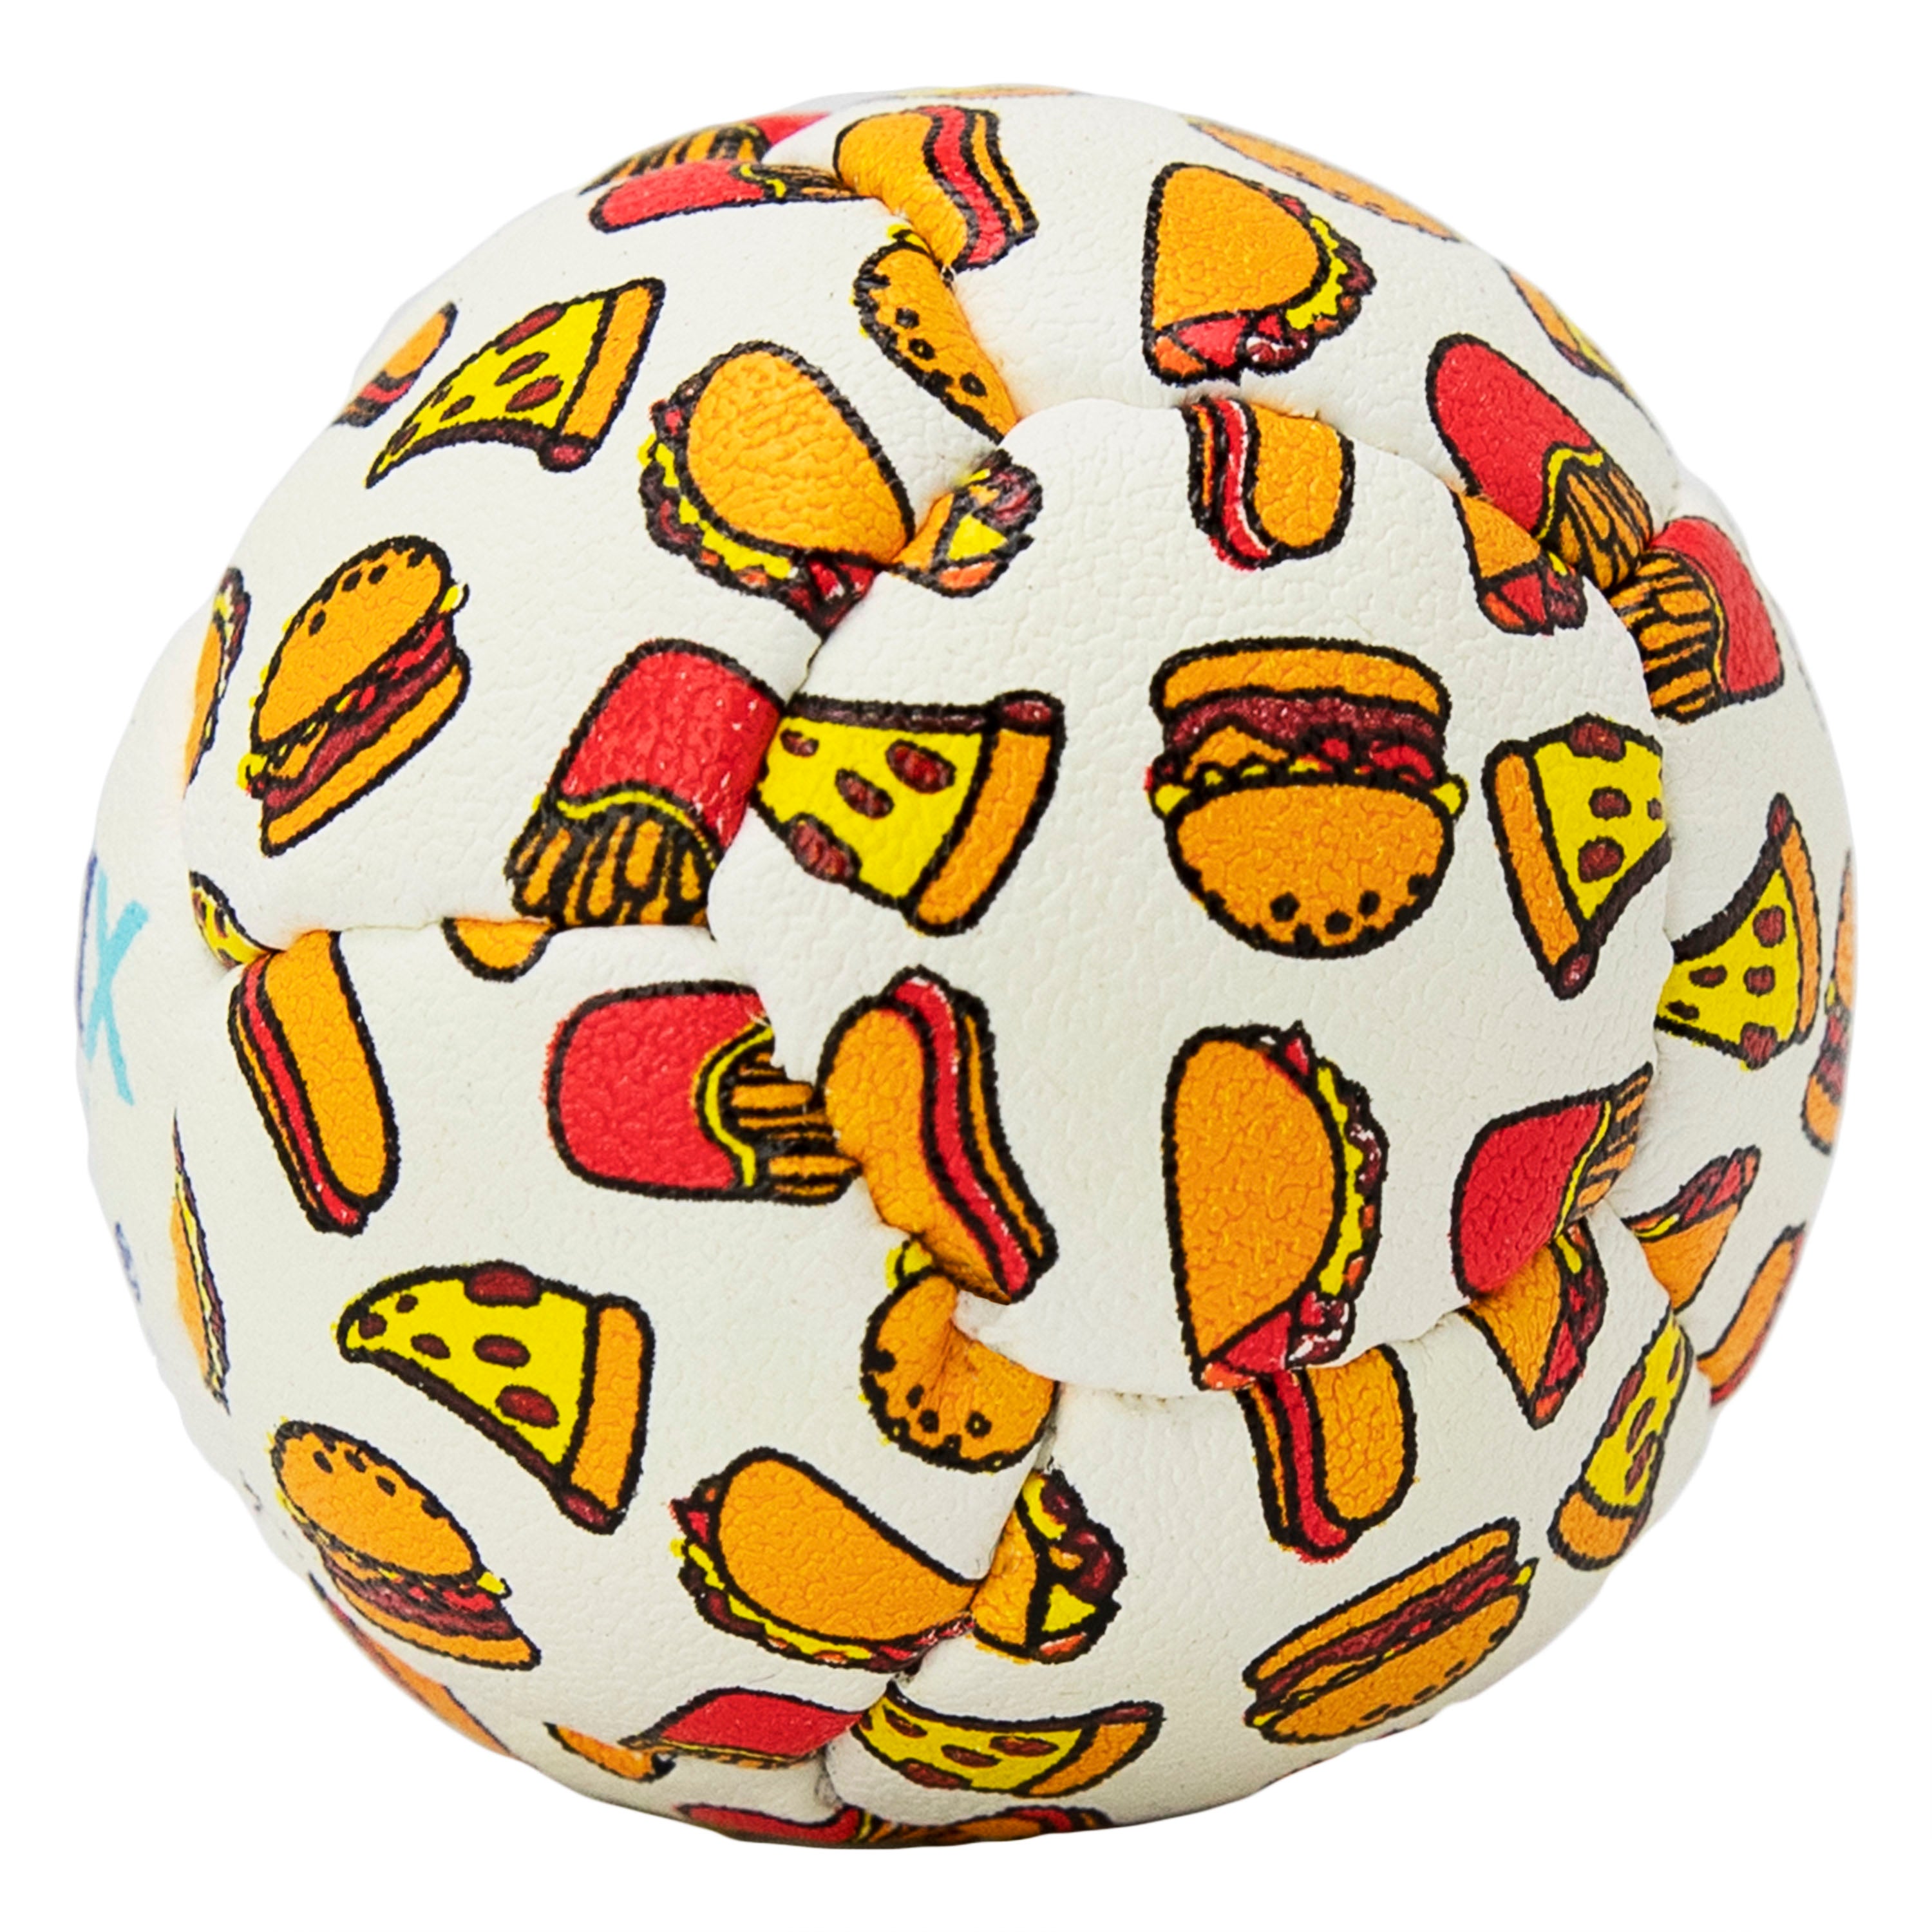 Multi Junk Food Swax Lax Lacrosse Training Ball - Side View